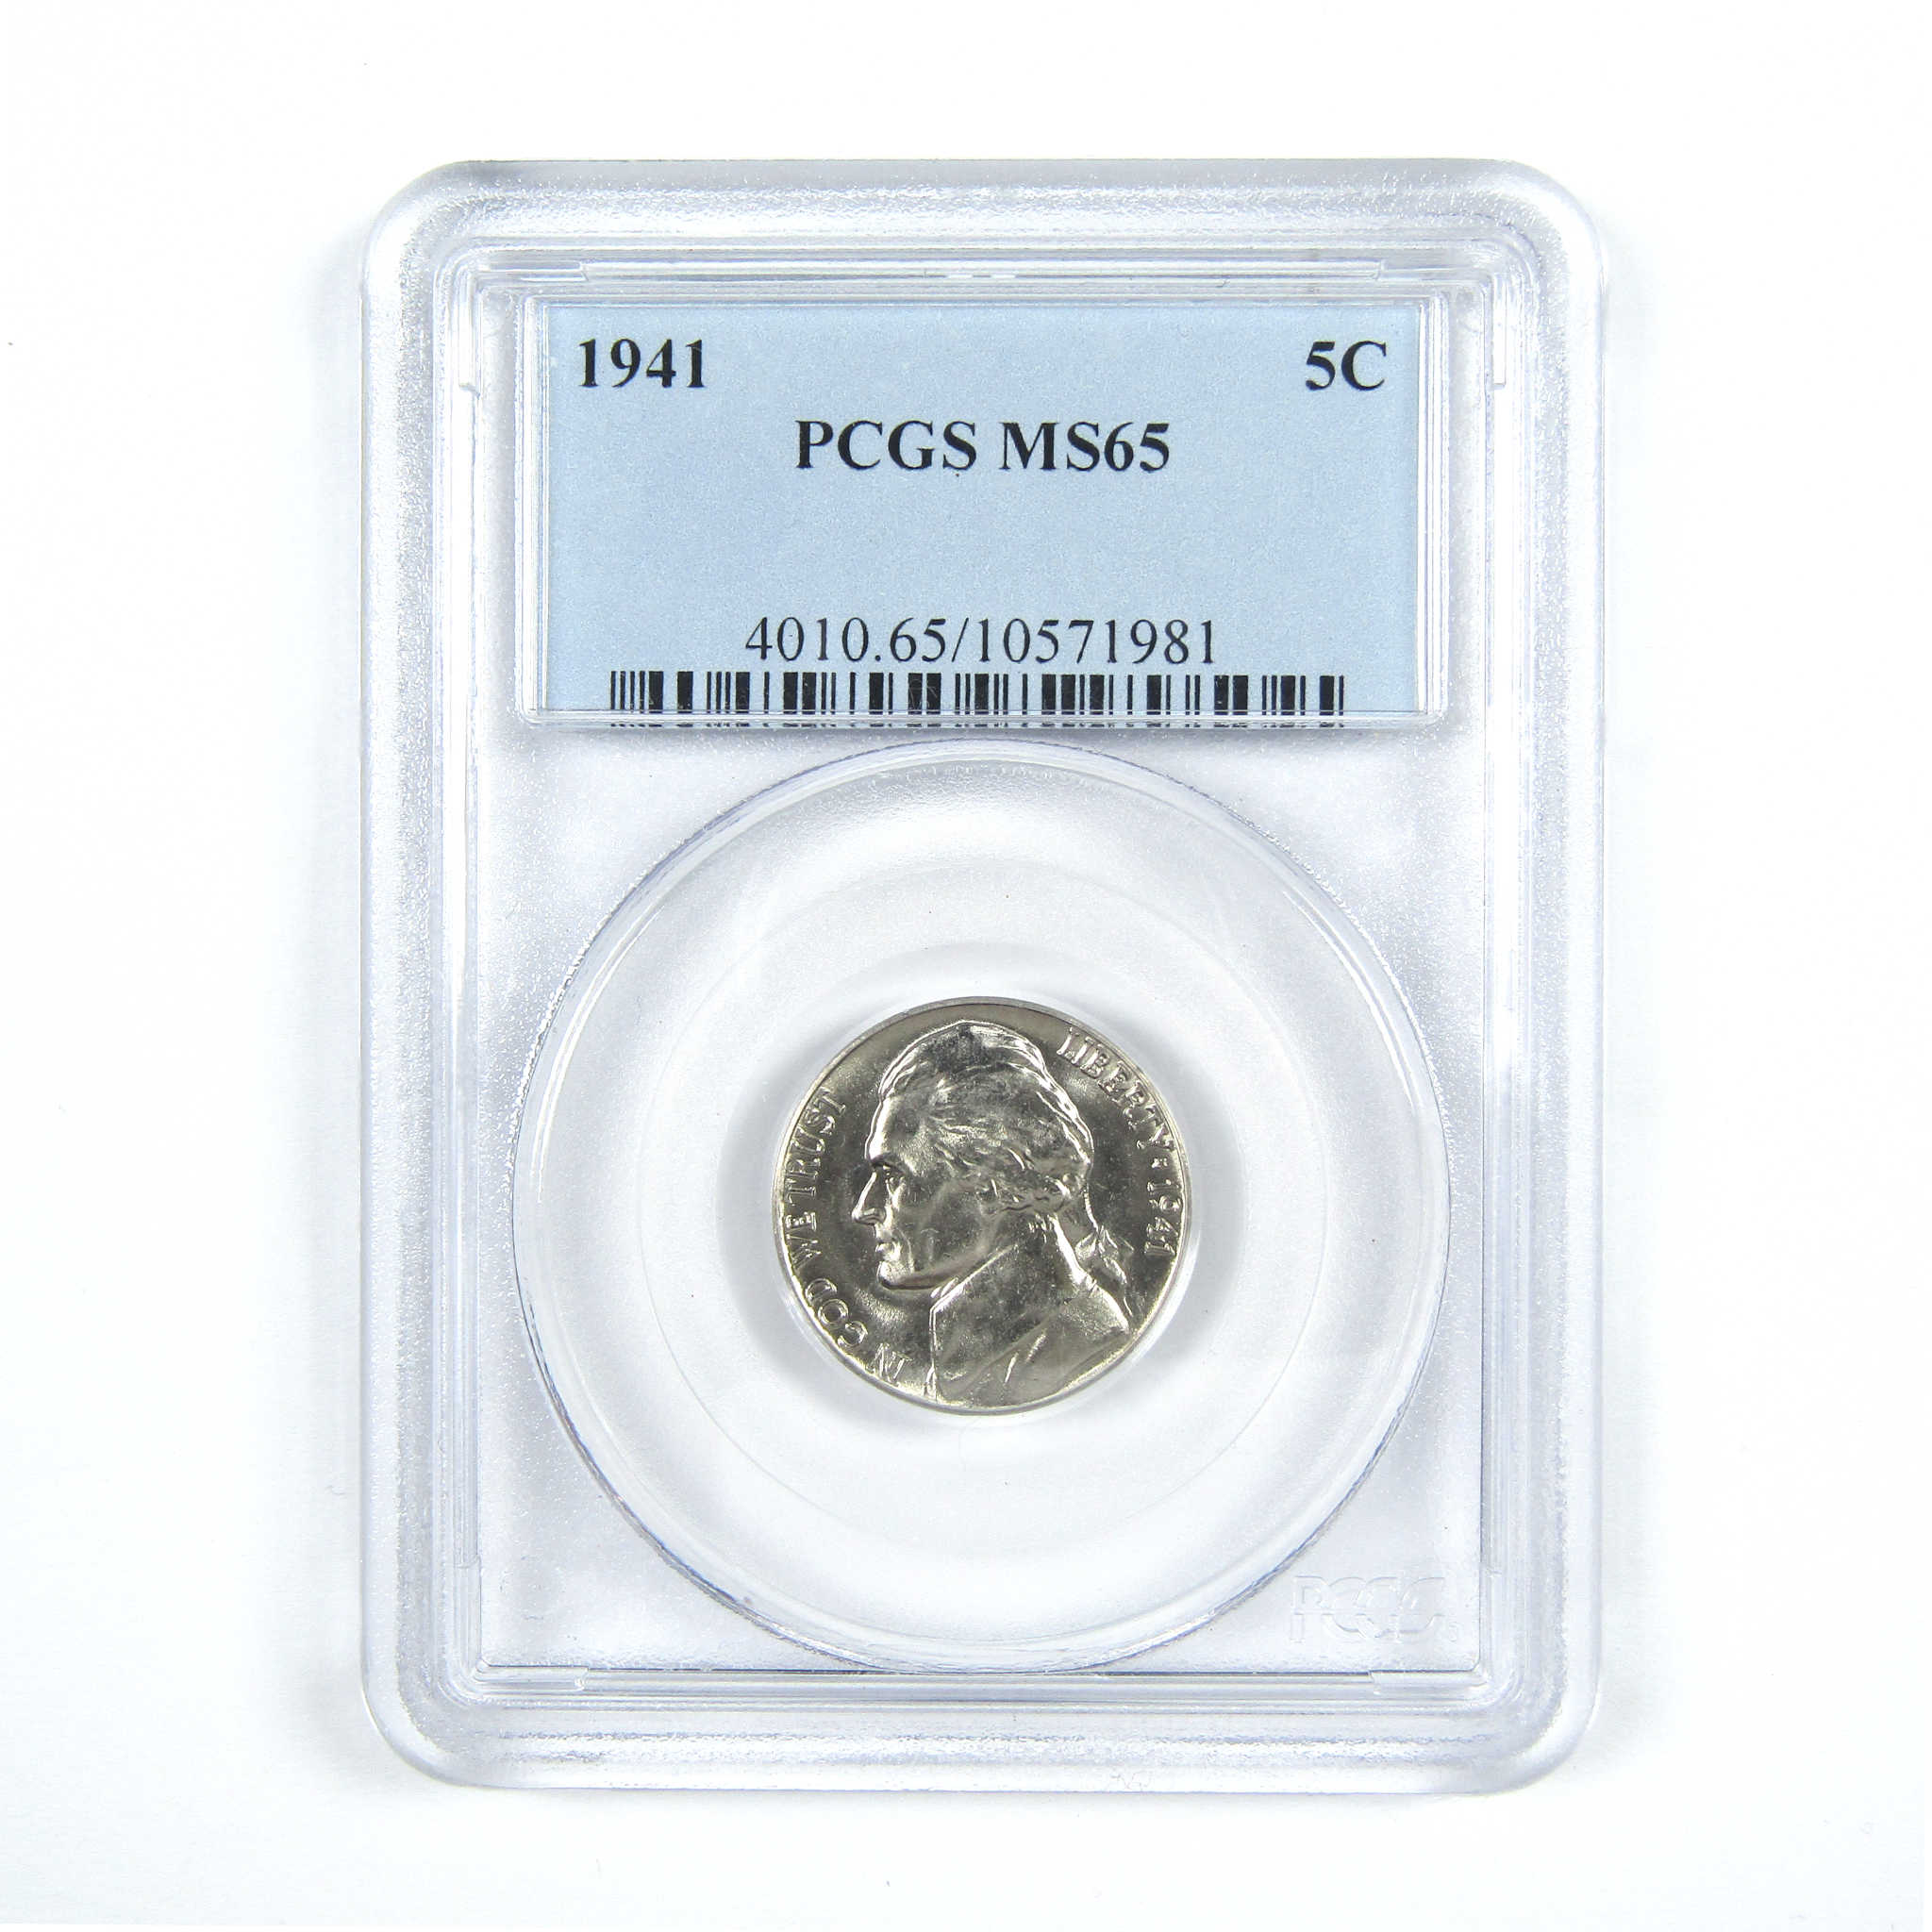 1941 Jefferson Nickel MS 65 PCGS 5c Uncirculated Coin SKU:CPC5182